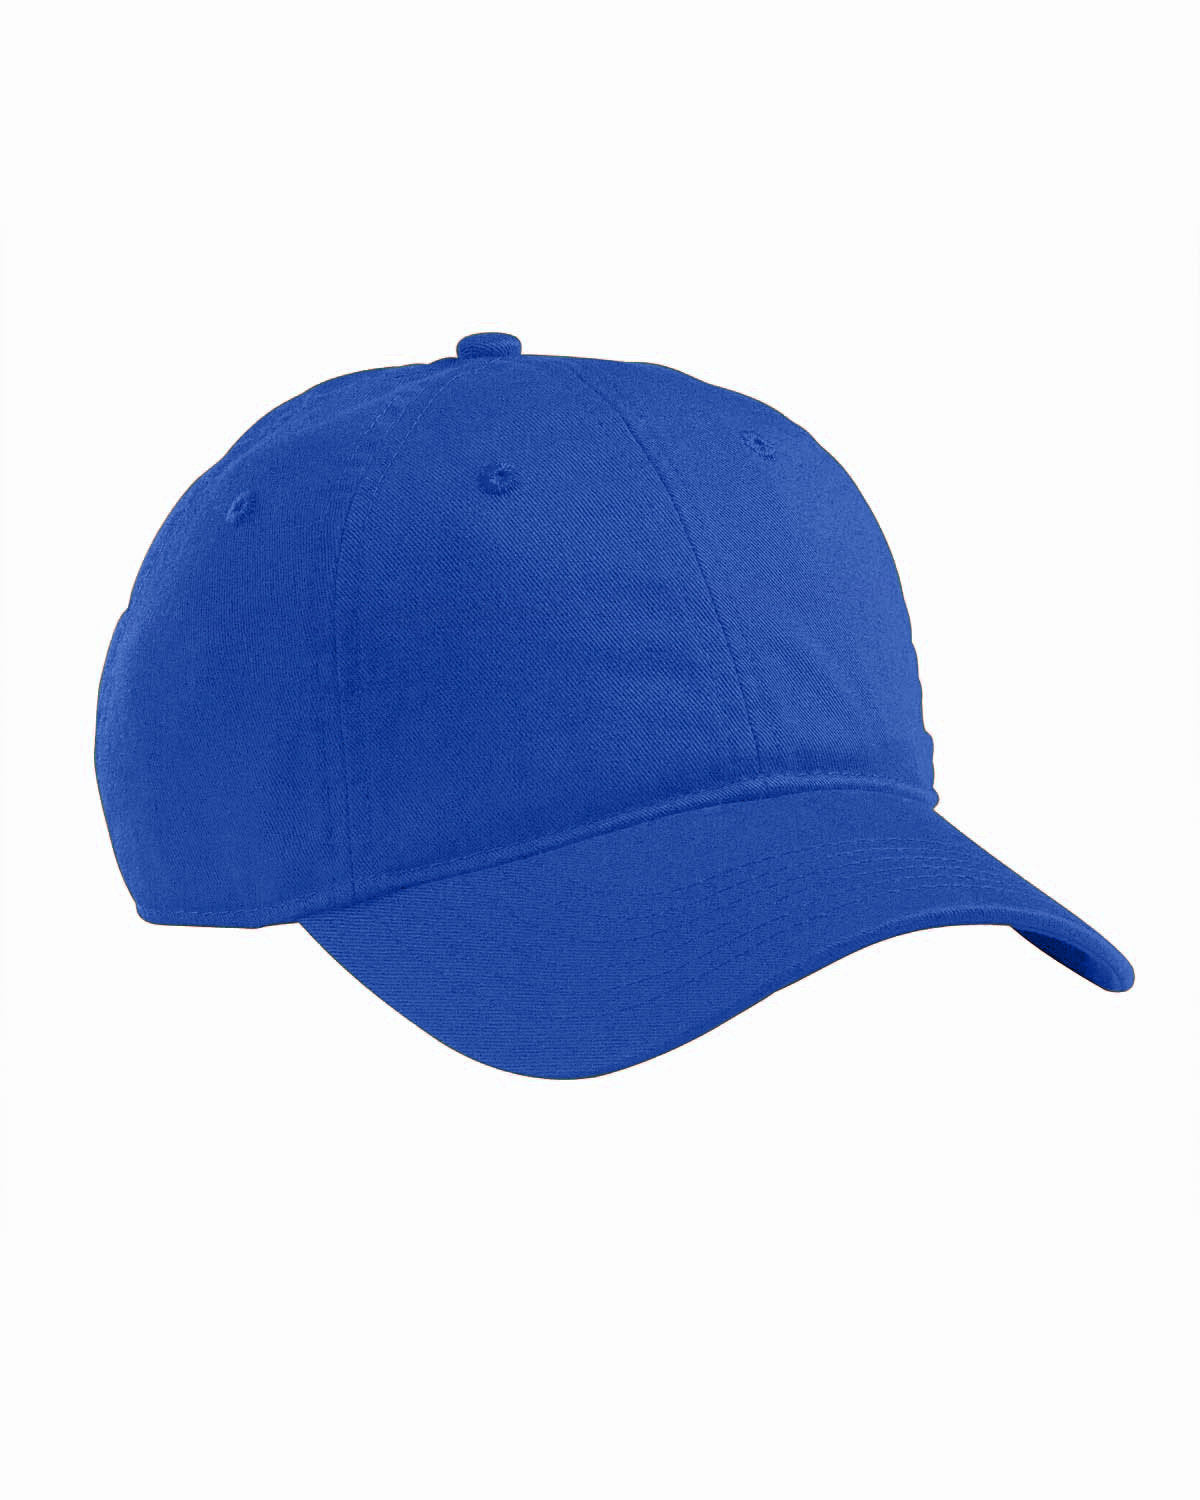 Customizable Econscious Organic Cotton Unstructured Baseball Hat in blue.